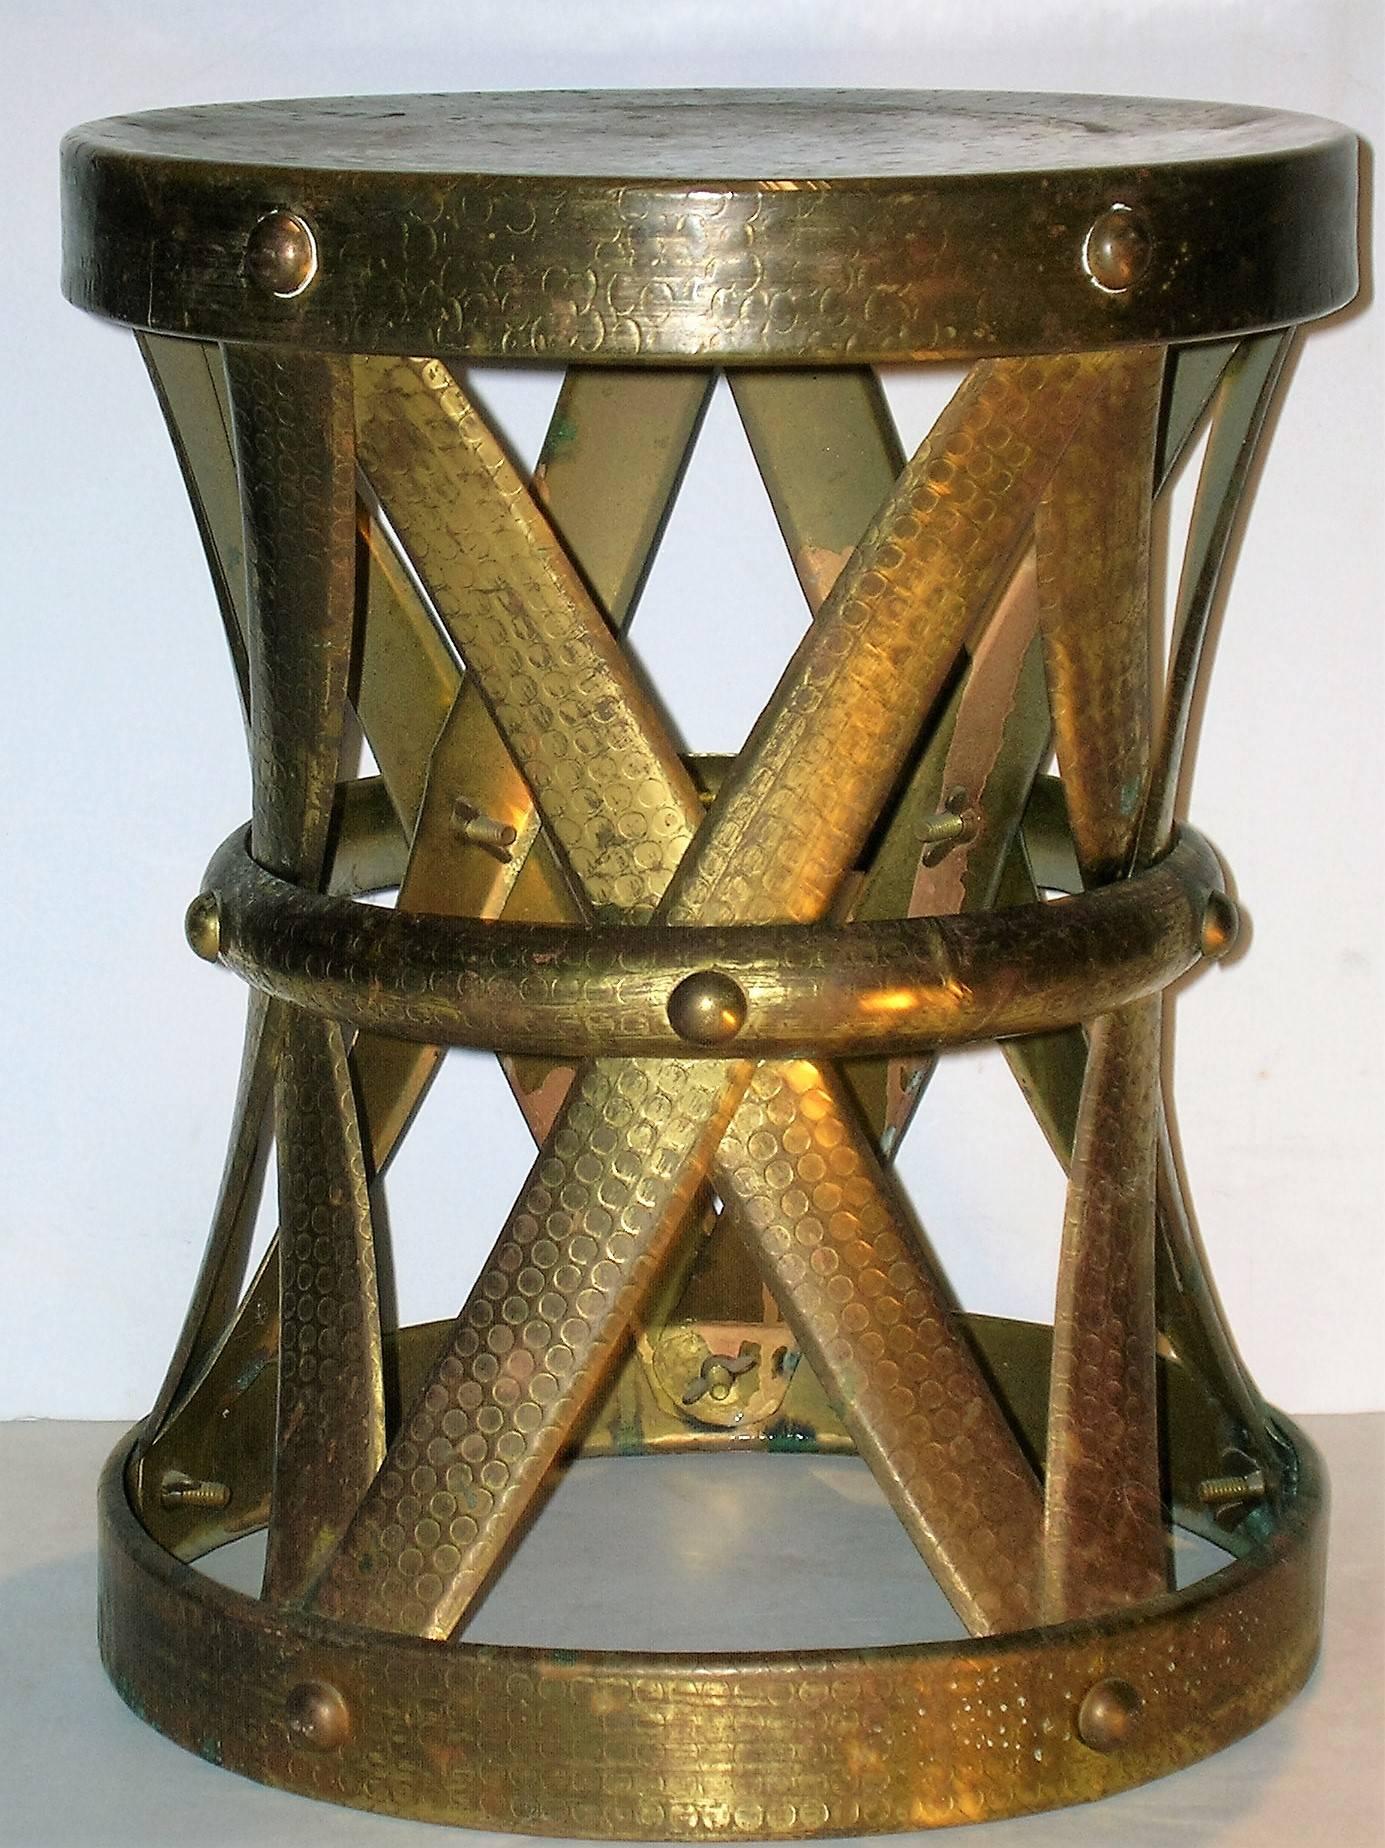 1970s Hollywood Regency riveted brass X-form drum stool taboret table with beautifully aged color patina and nicely detailed metal work. See all pictures.